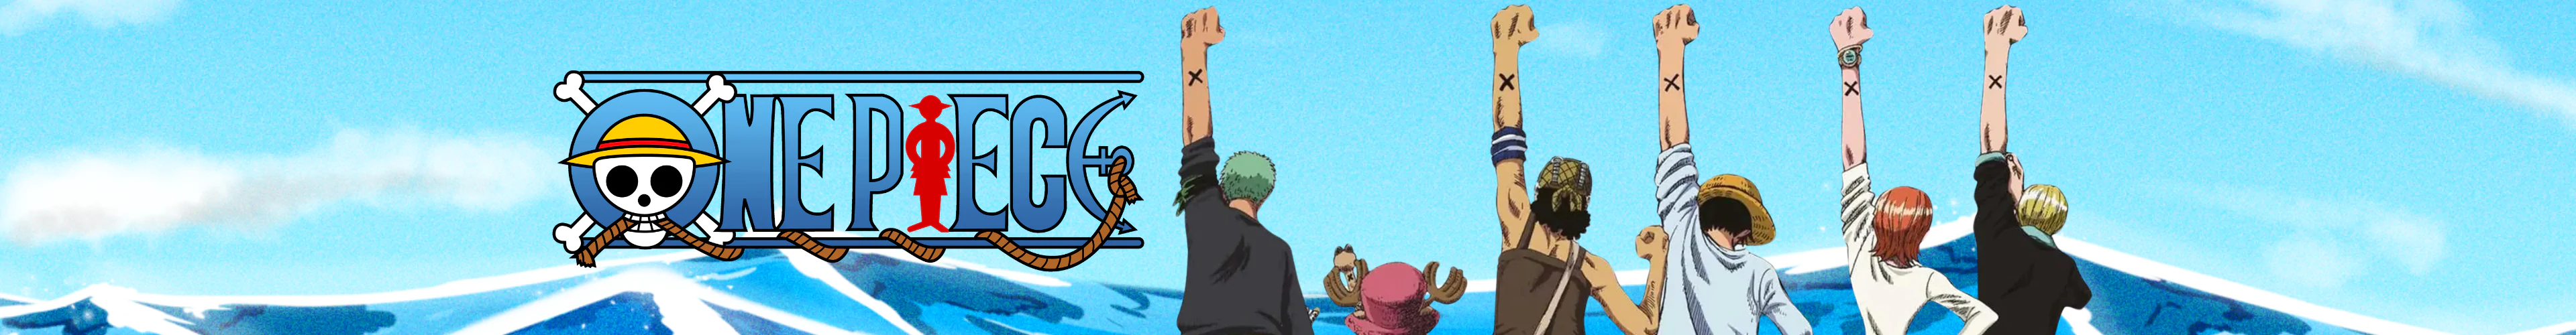 One Piece products banner